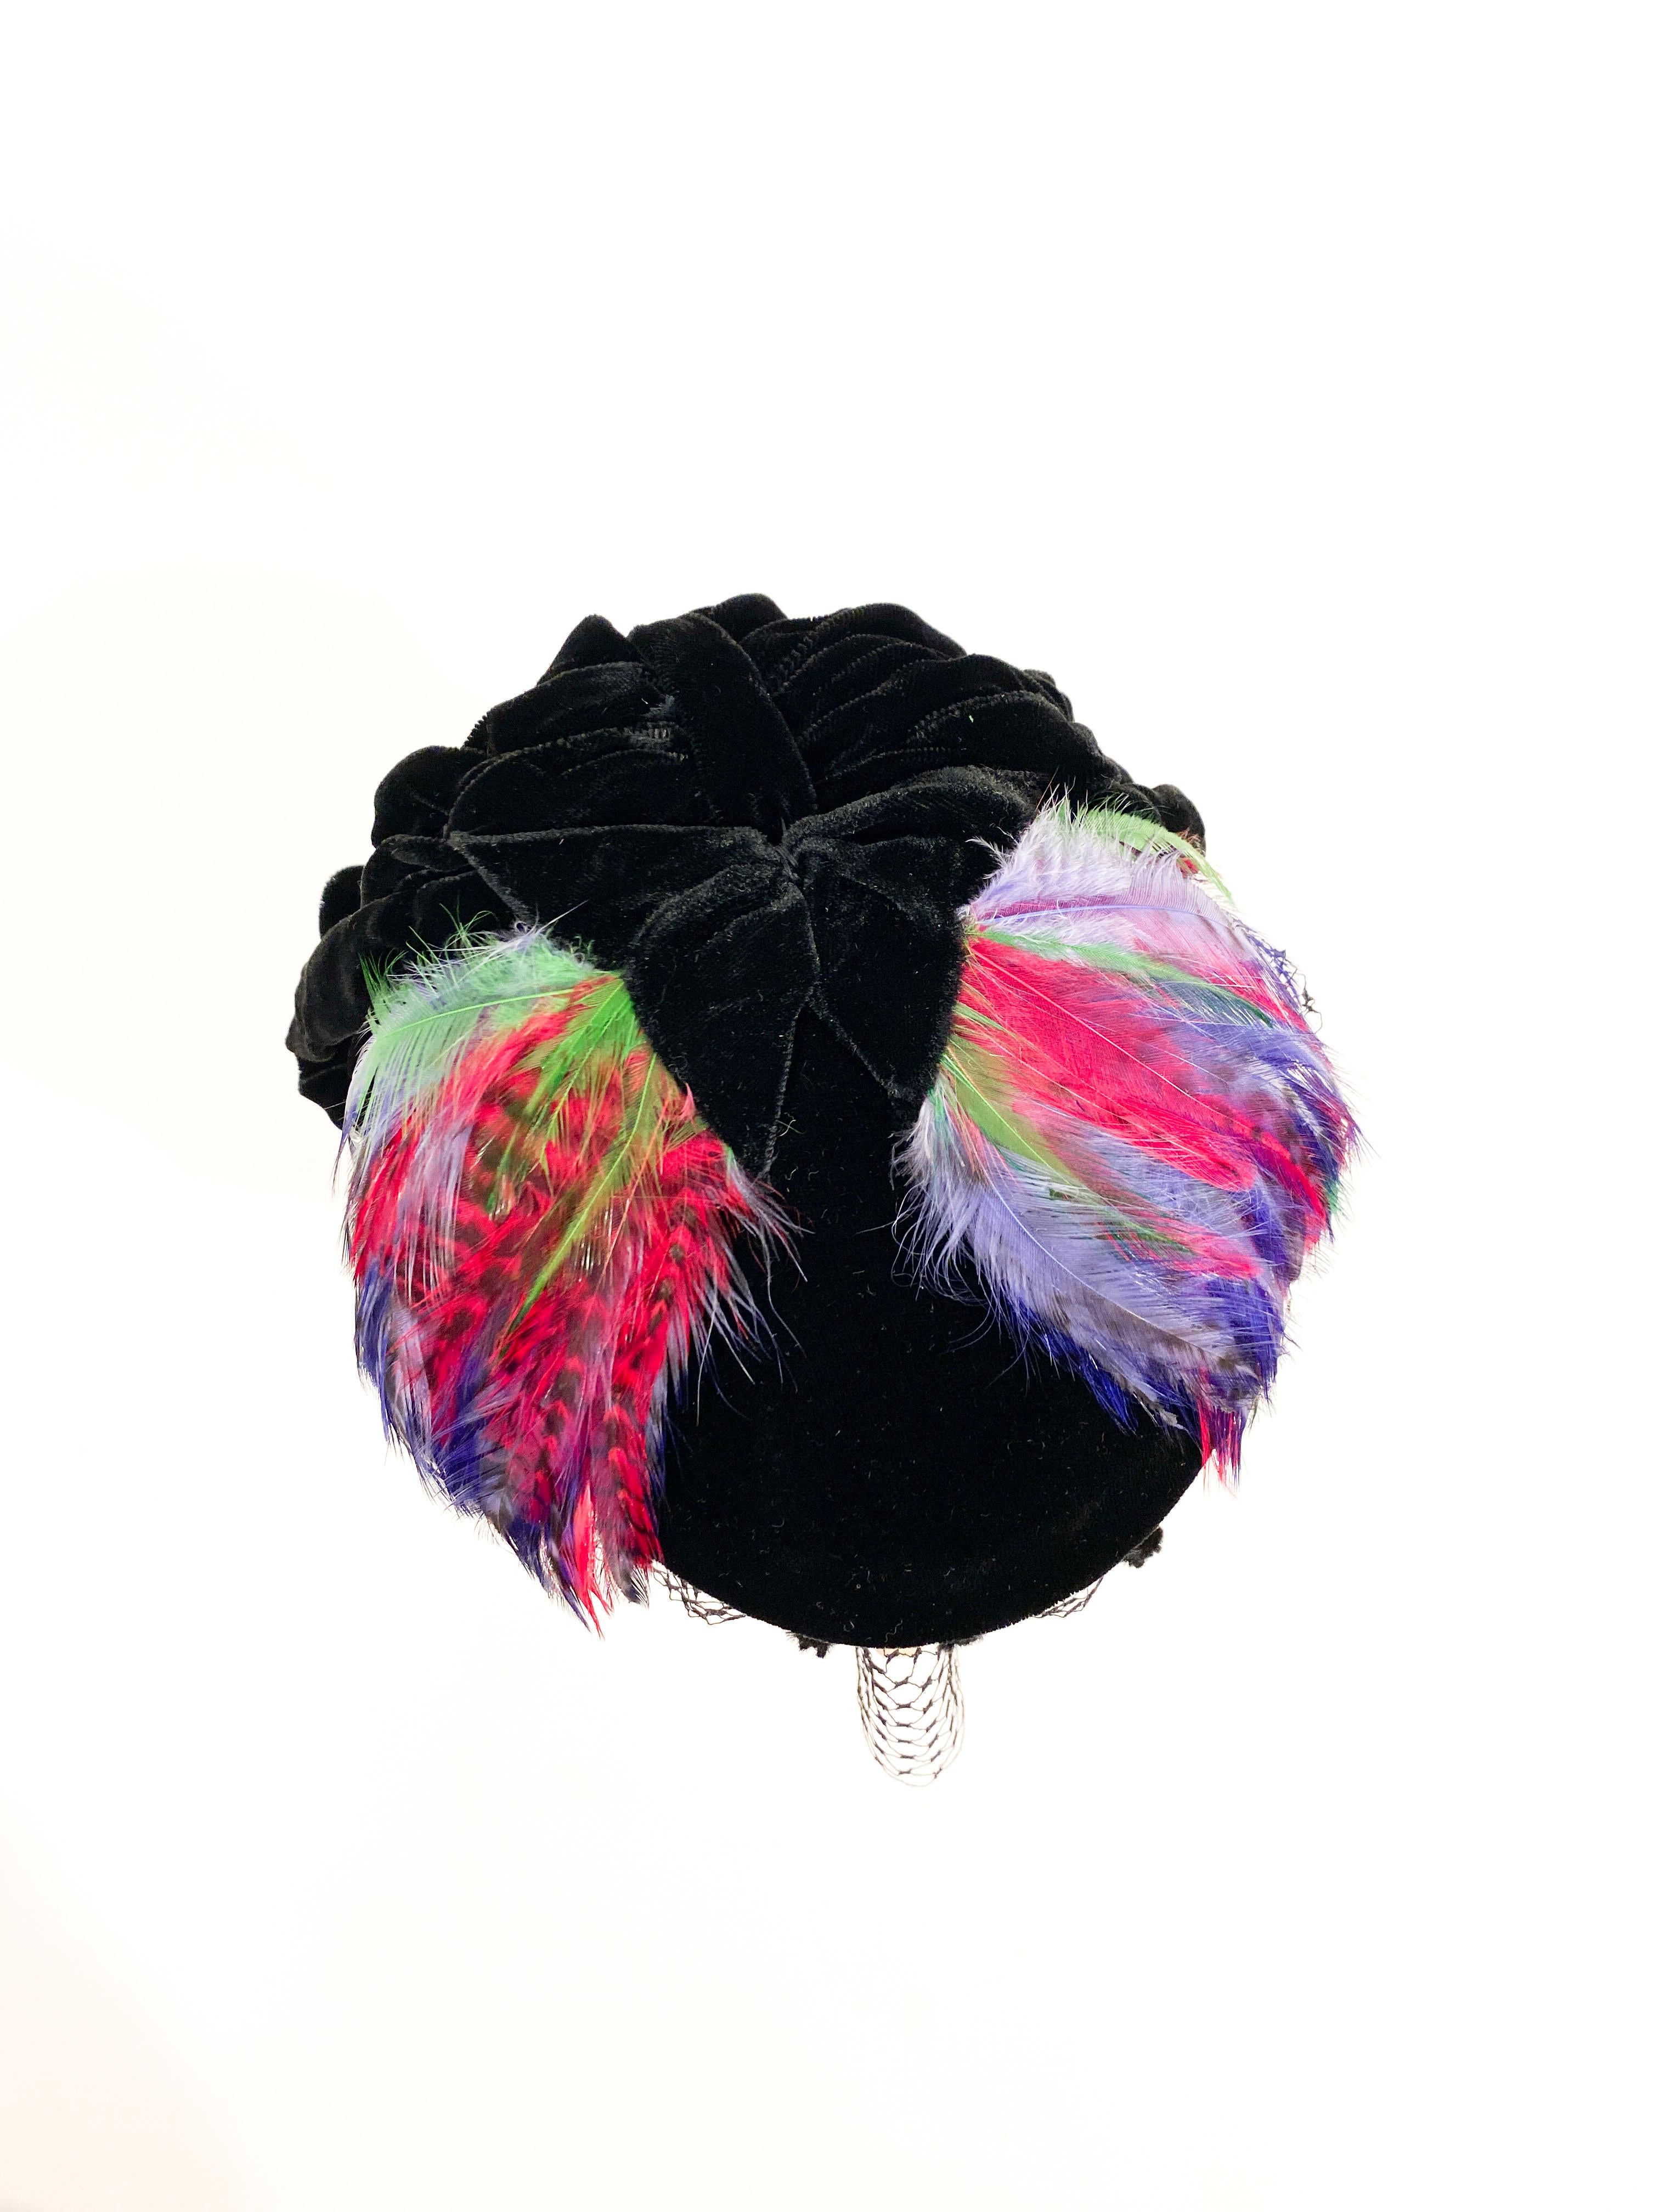 1940s Black Velvet Cocktail Hat with Veil and Colored Feathers  For Sale 1